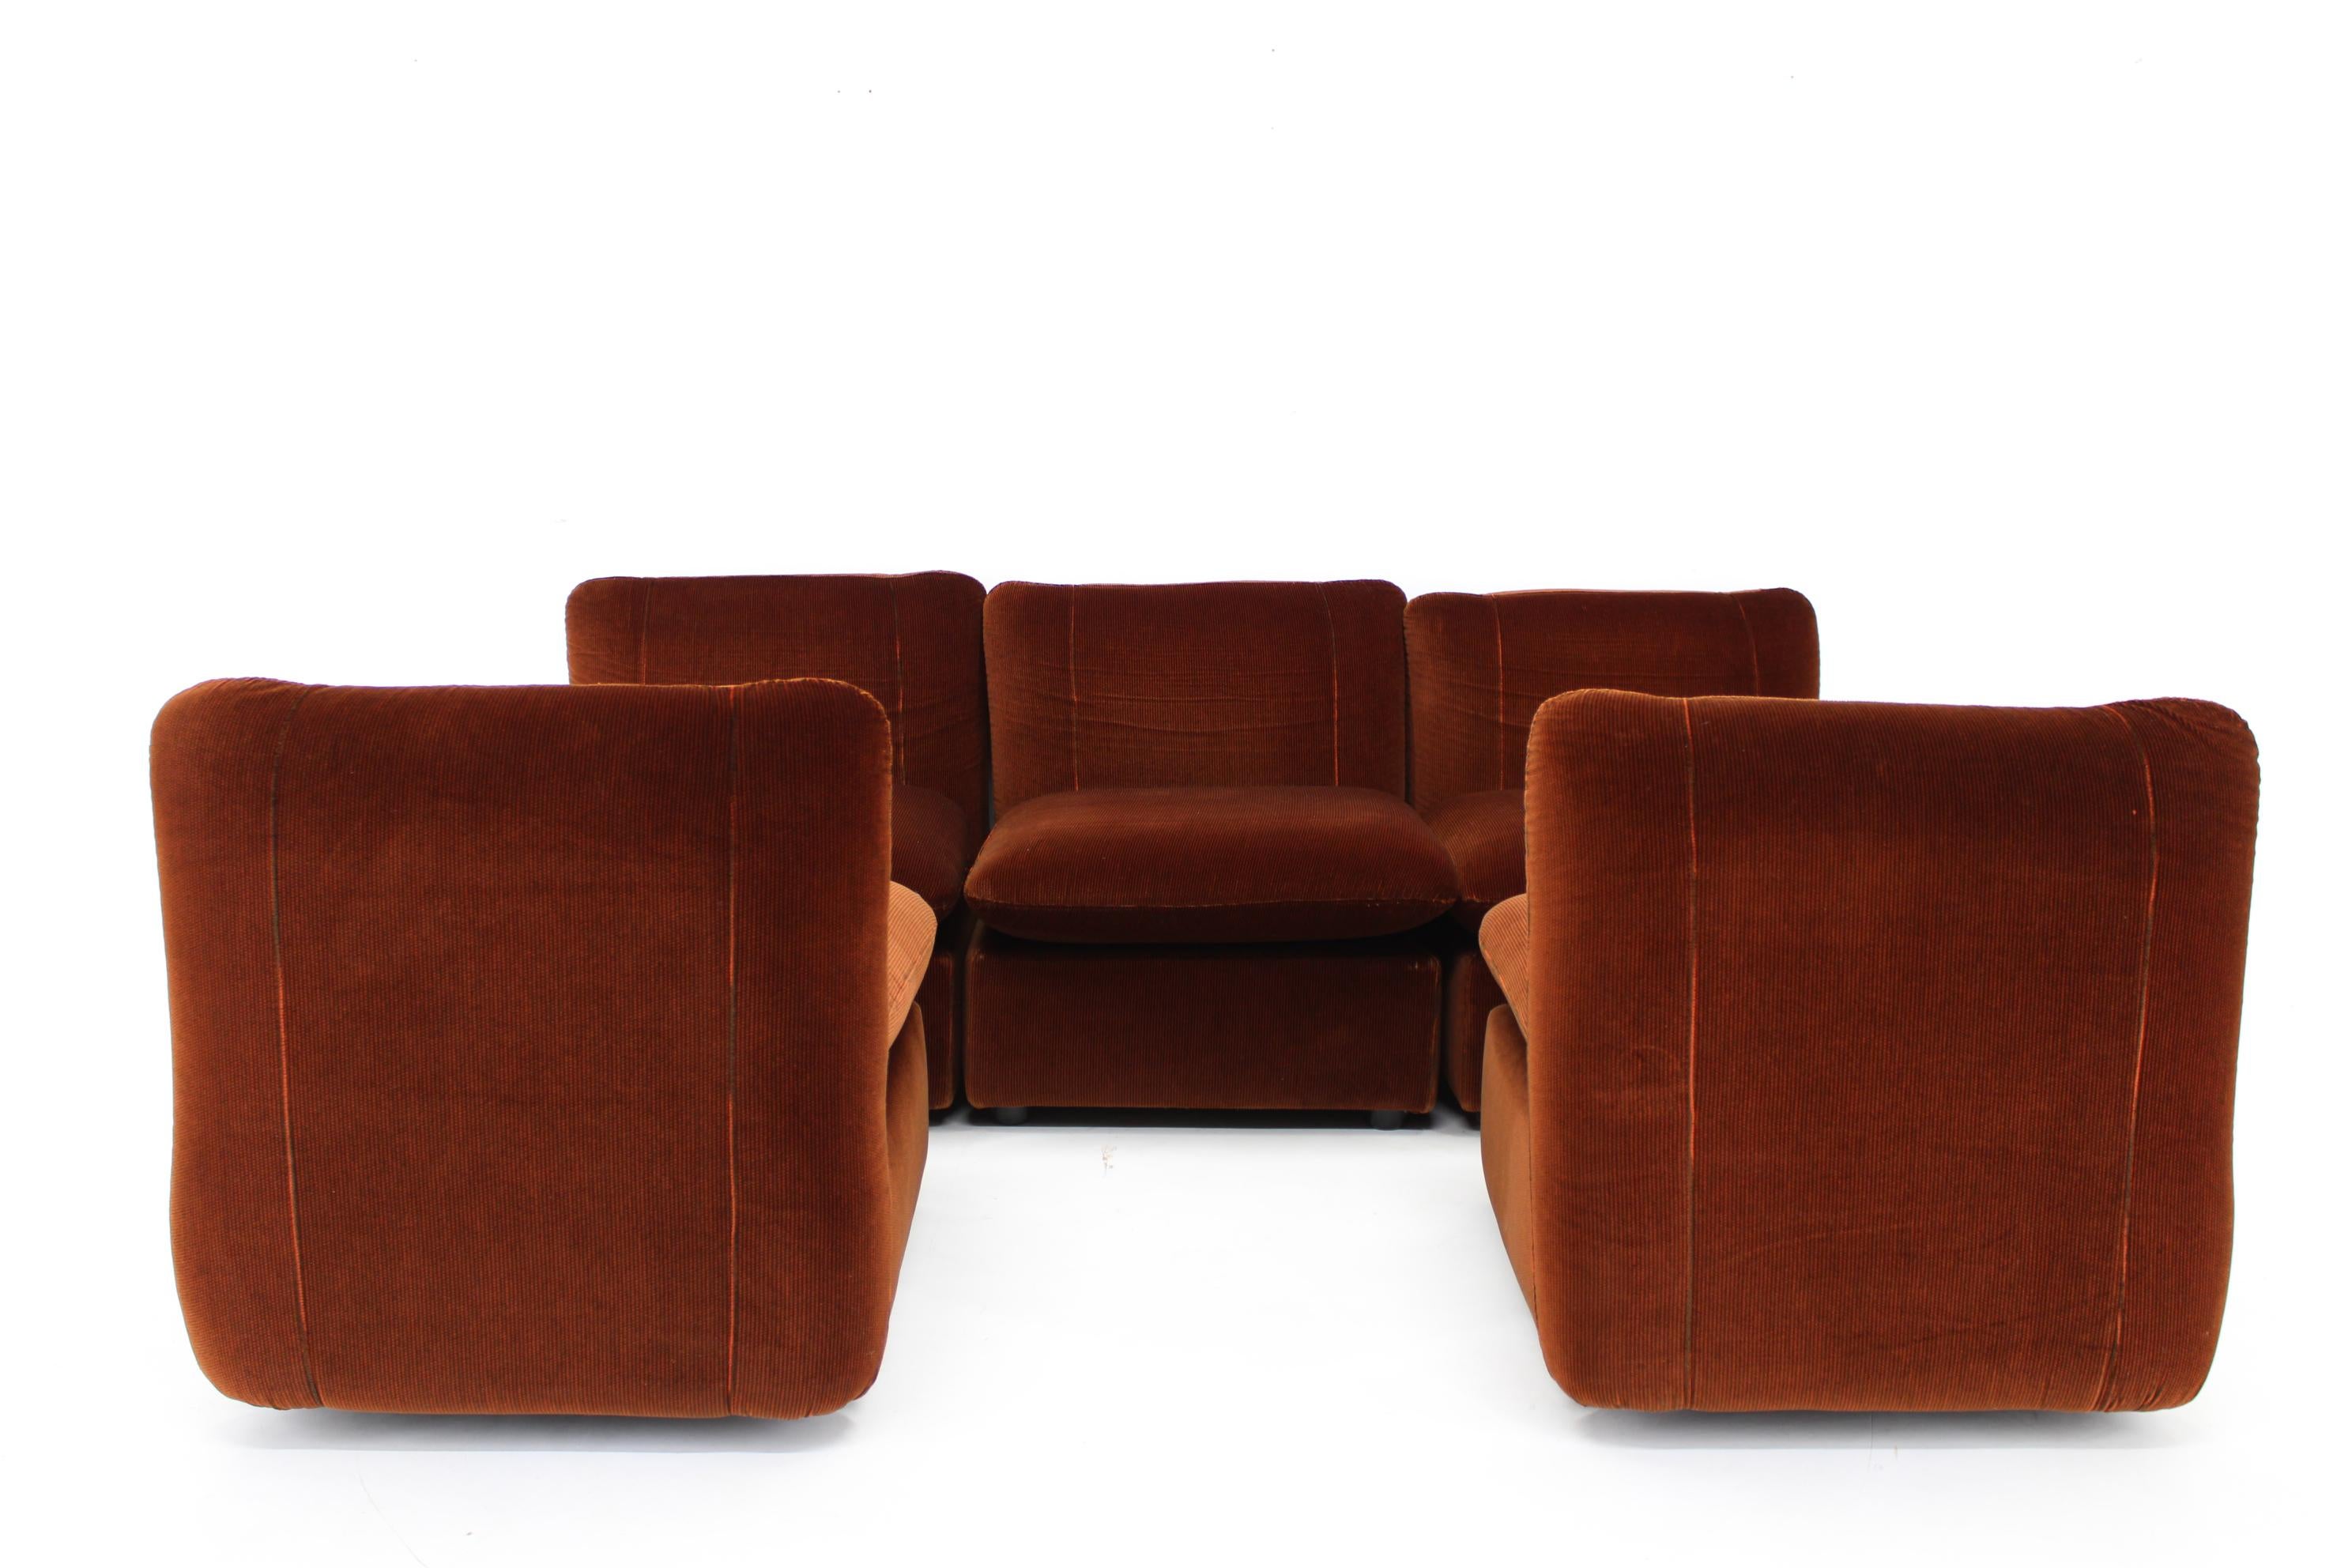 1970s Modular Sofa or Chairs, Italy For Sale 3